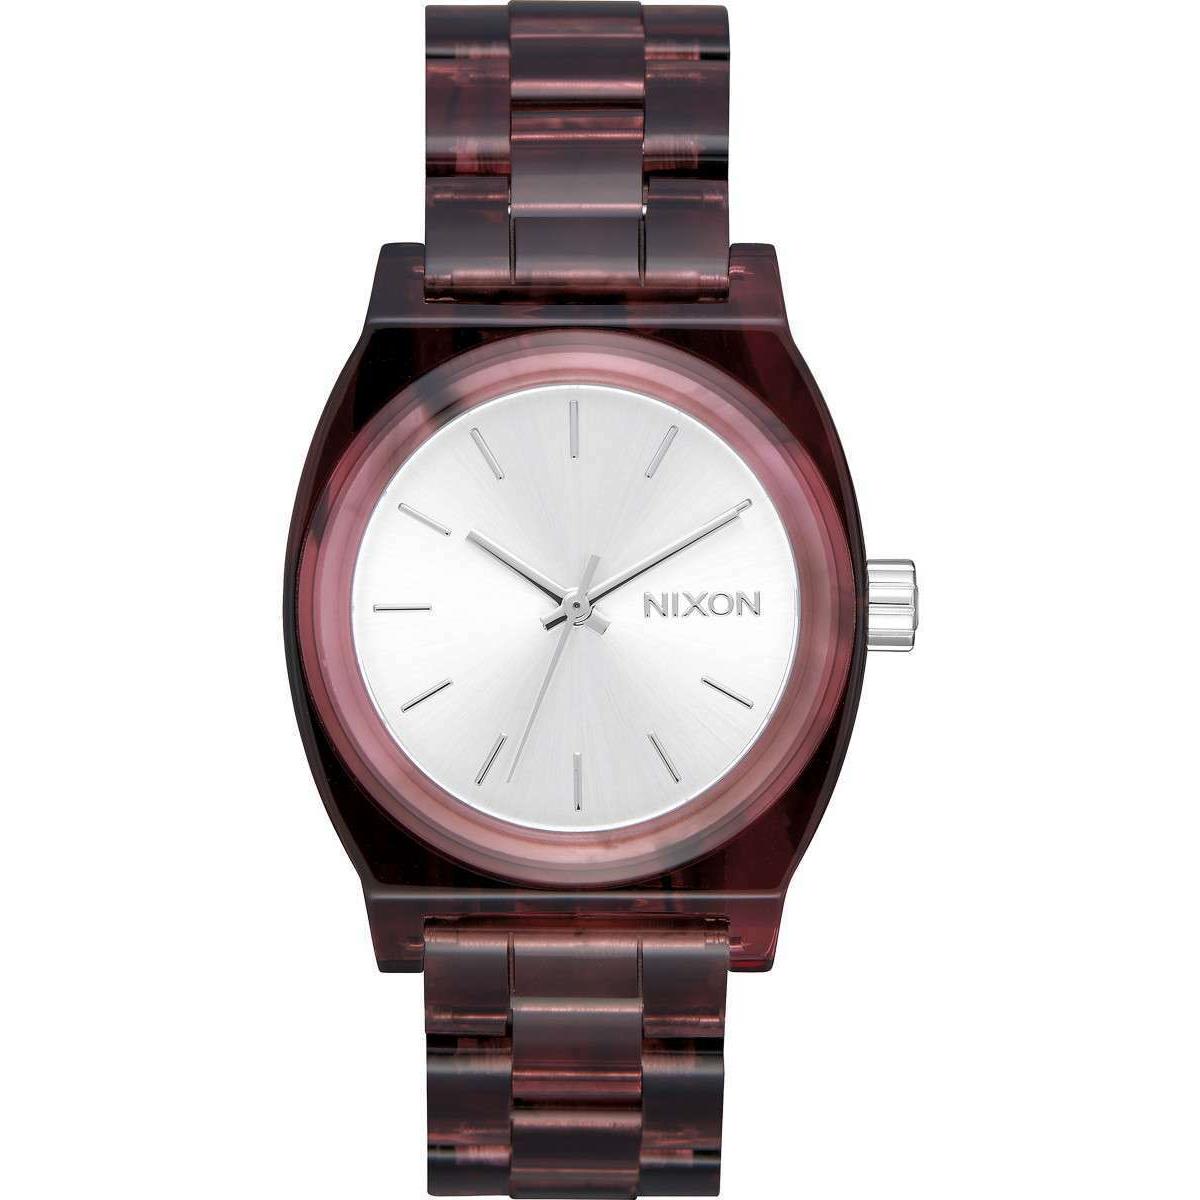 Nixon Medium Time Teller Acetate Red Watch A1214 200 / A1214-200 / A1214200 - Gray Dial, Red Band